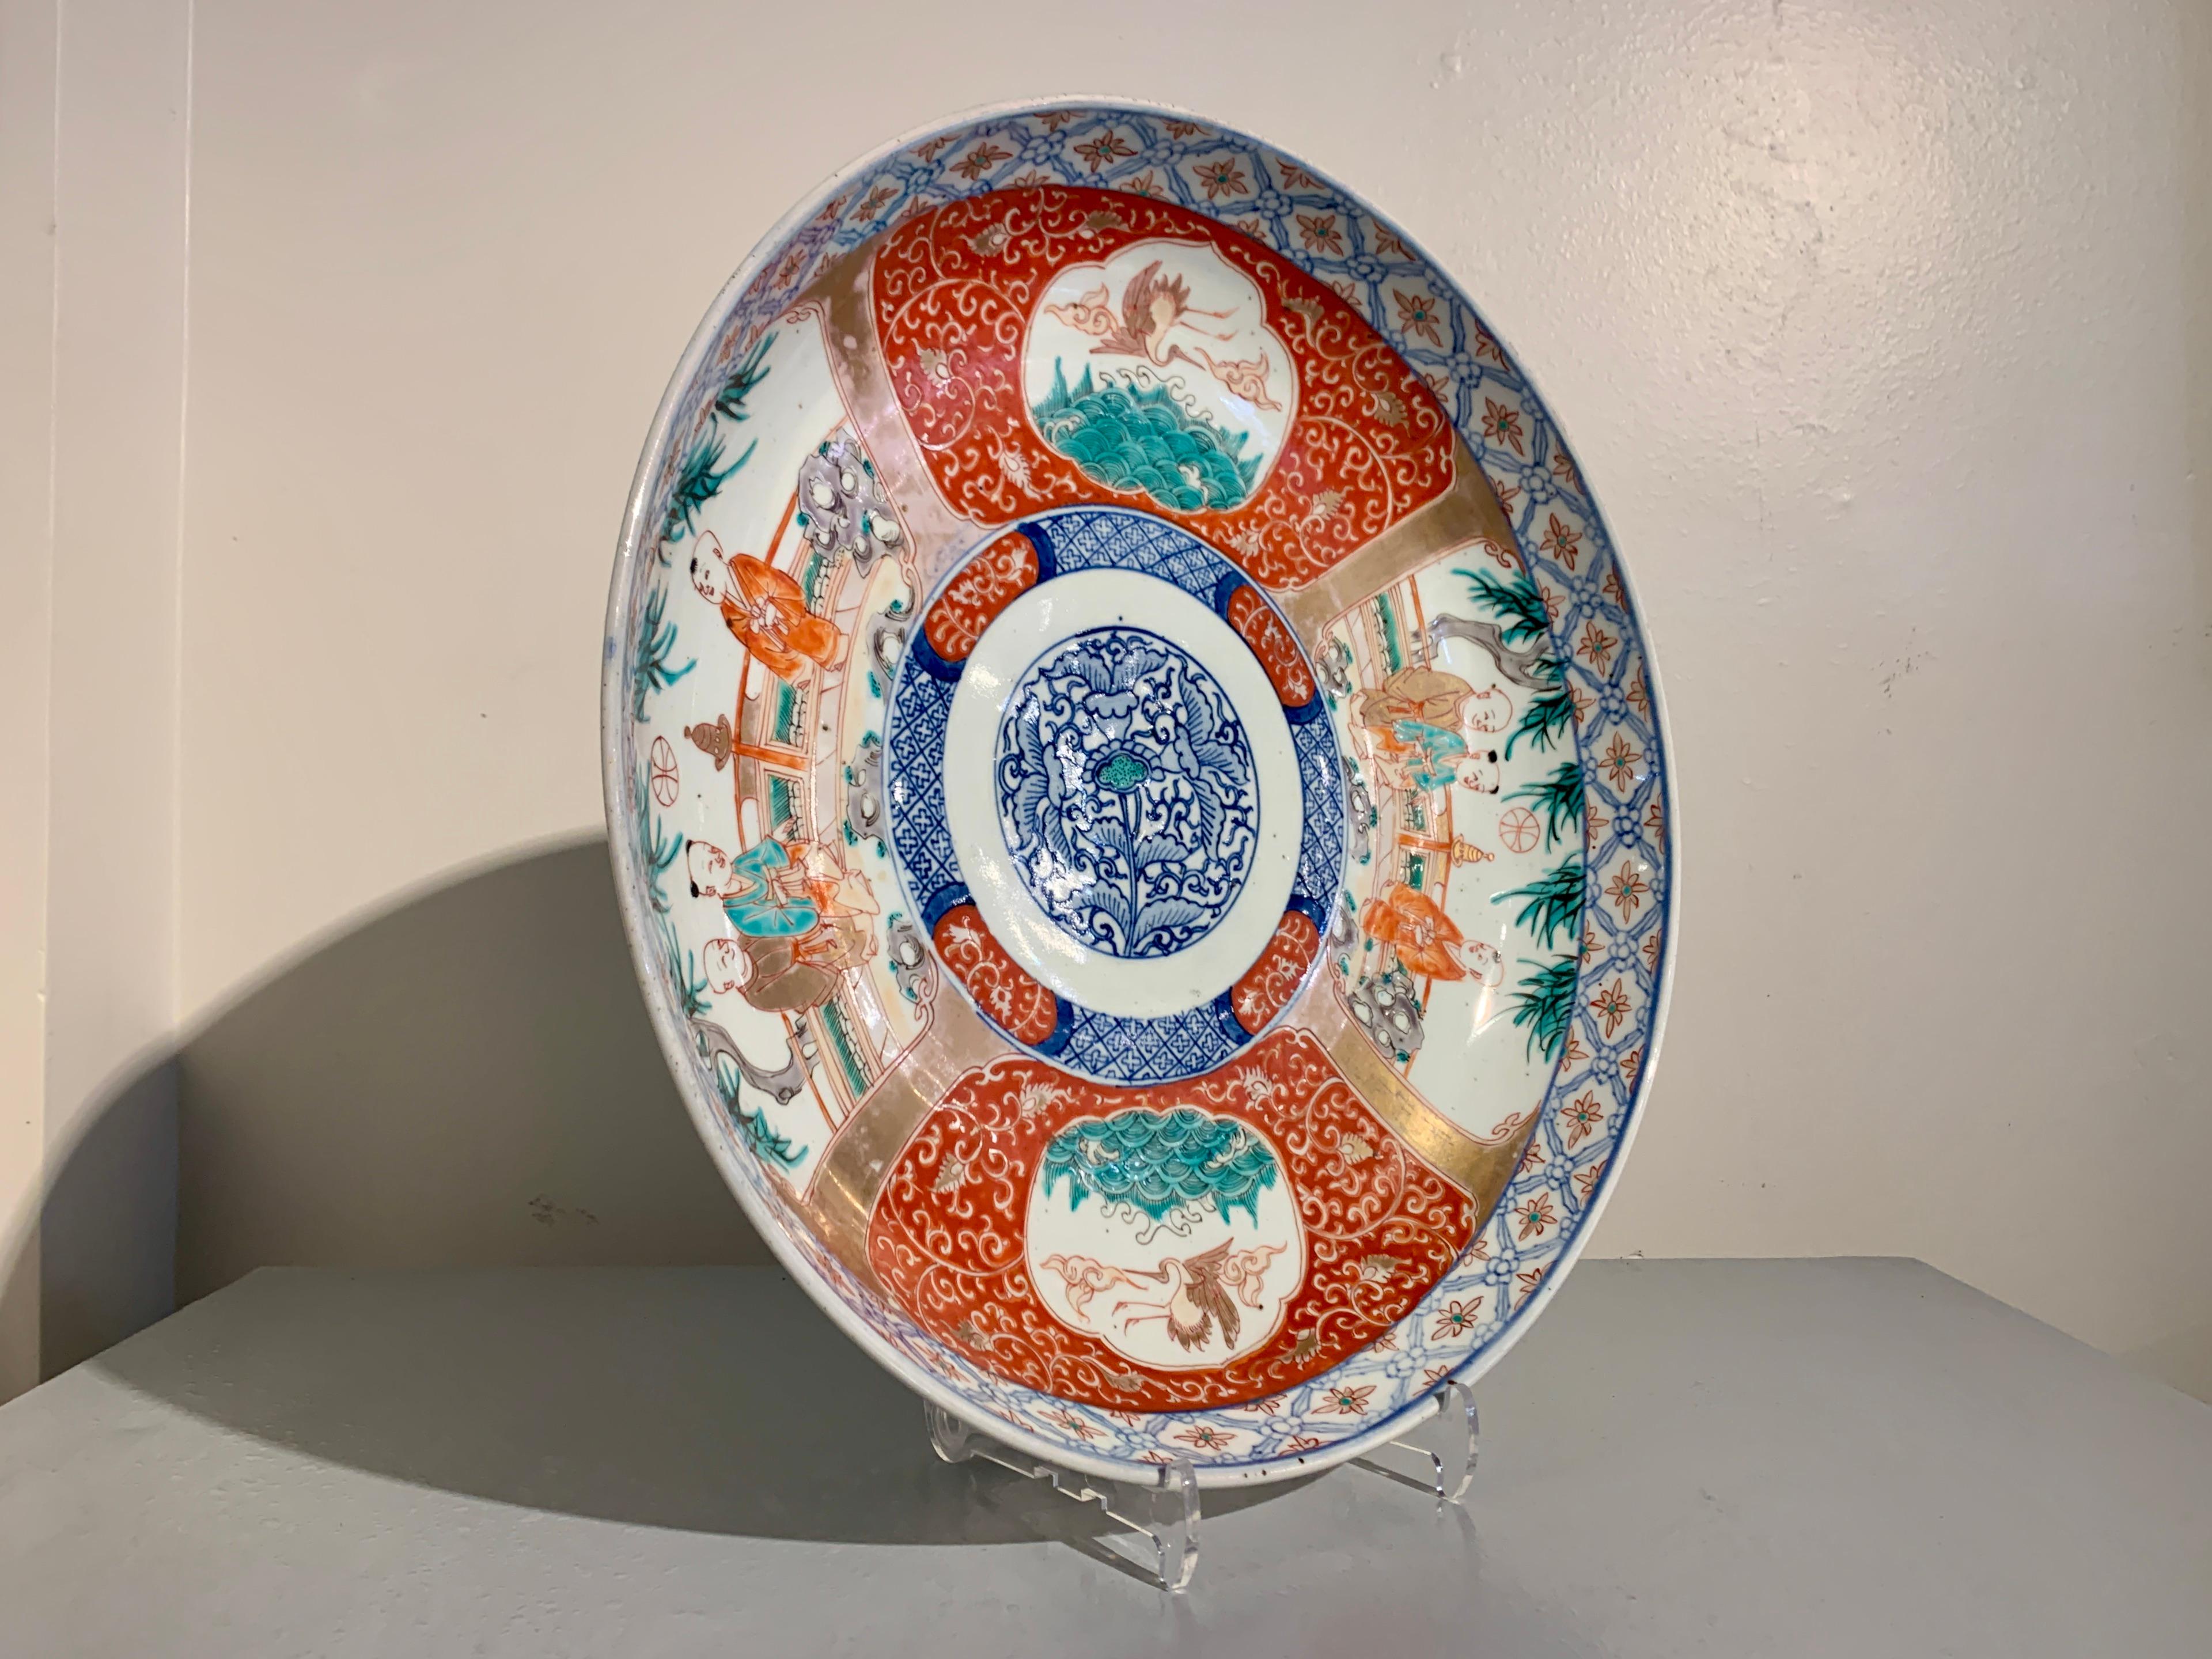 A large and charming Japanese imari charger with Chinese boys, Edo to Meiji Period, mid 19th century, Japan.

The large porcelain charger measuring 16